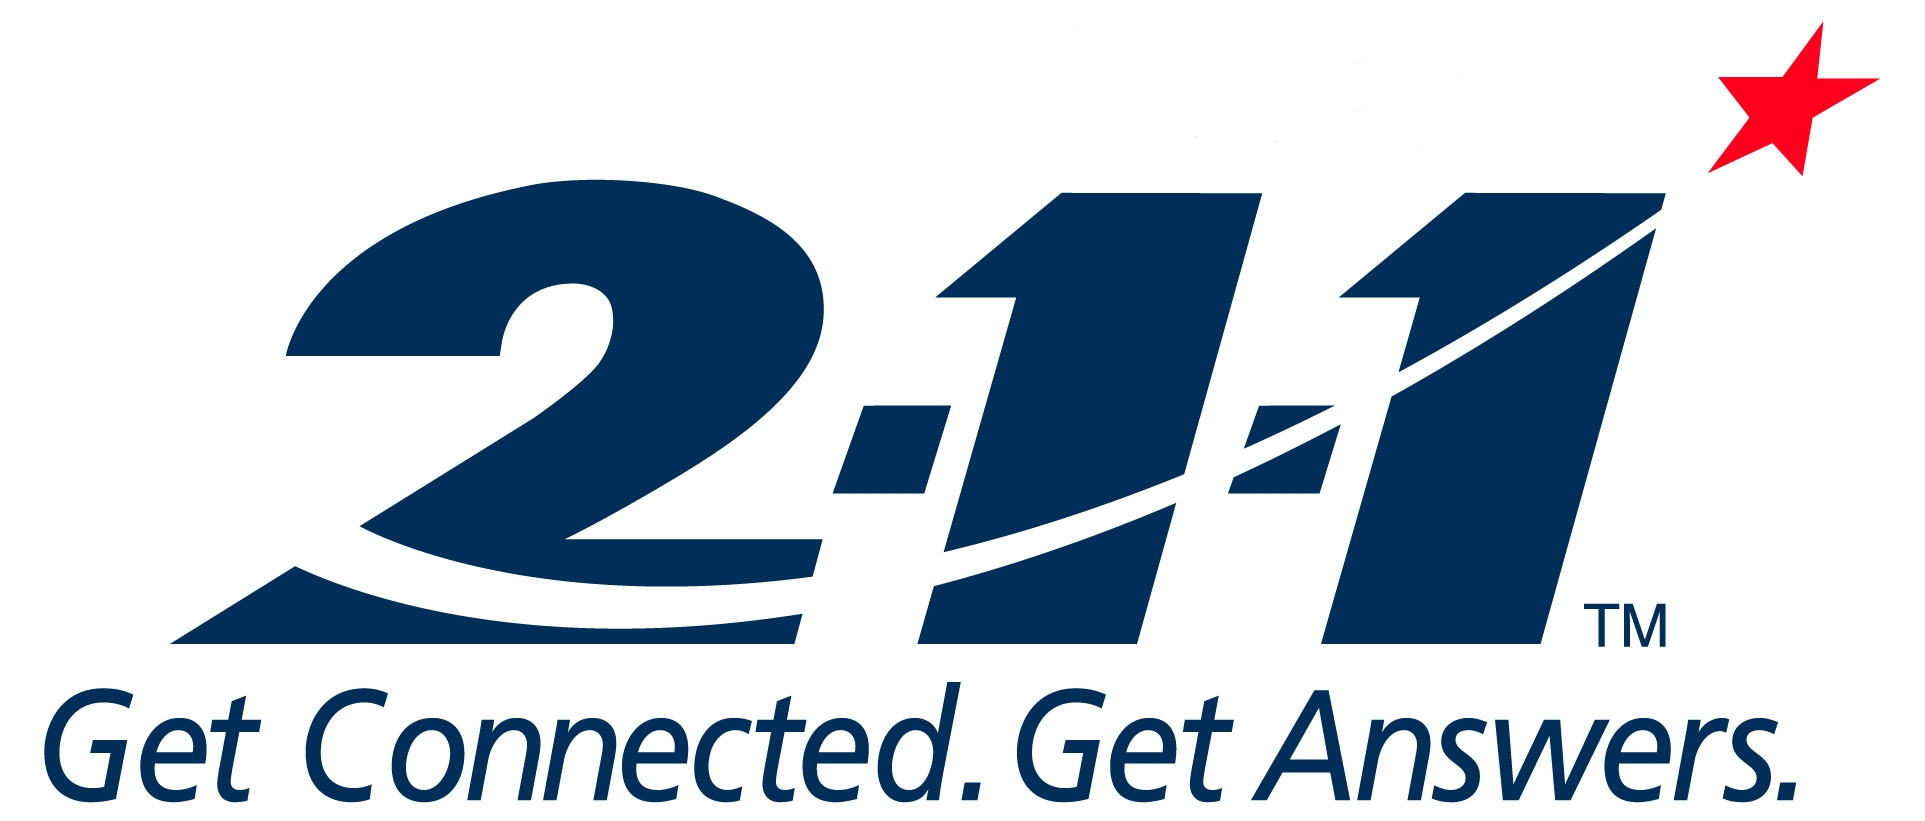 2-1-1 Day on Feb. 11 Celebrates Human Service Number